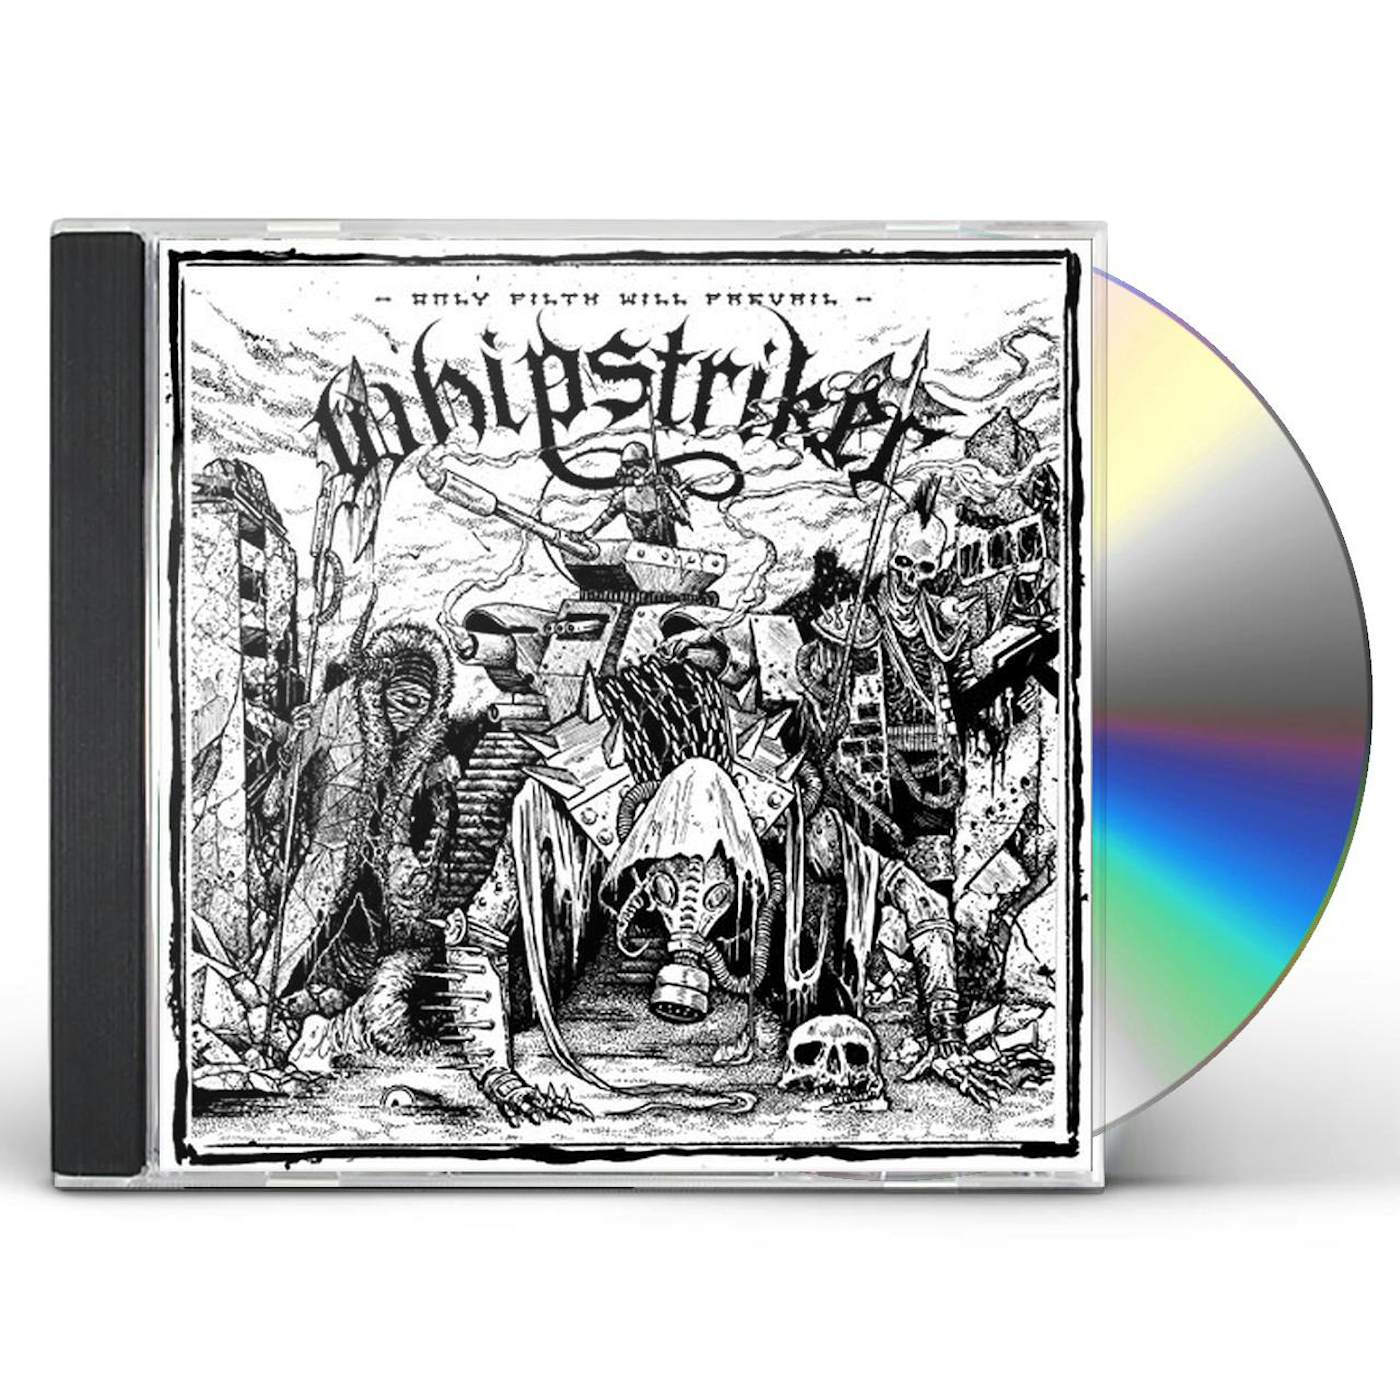 Whipstriker ONLY FILTH WILL PREVAIL CD